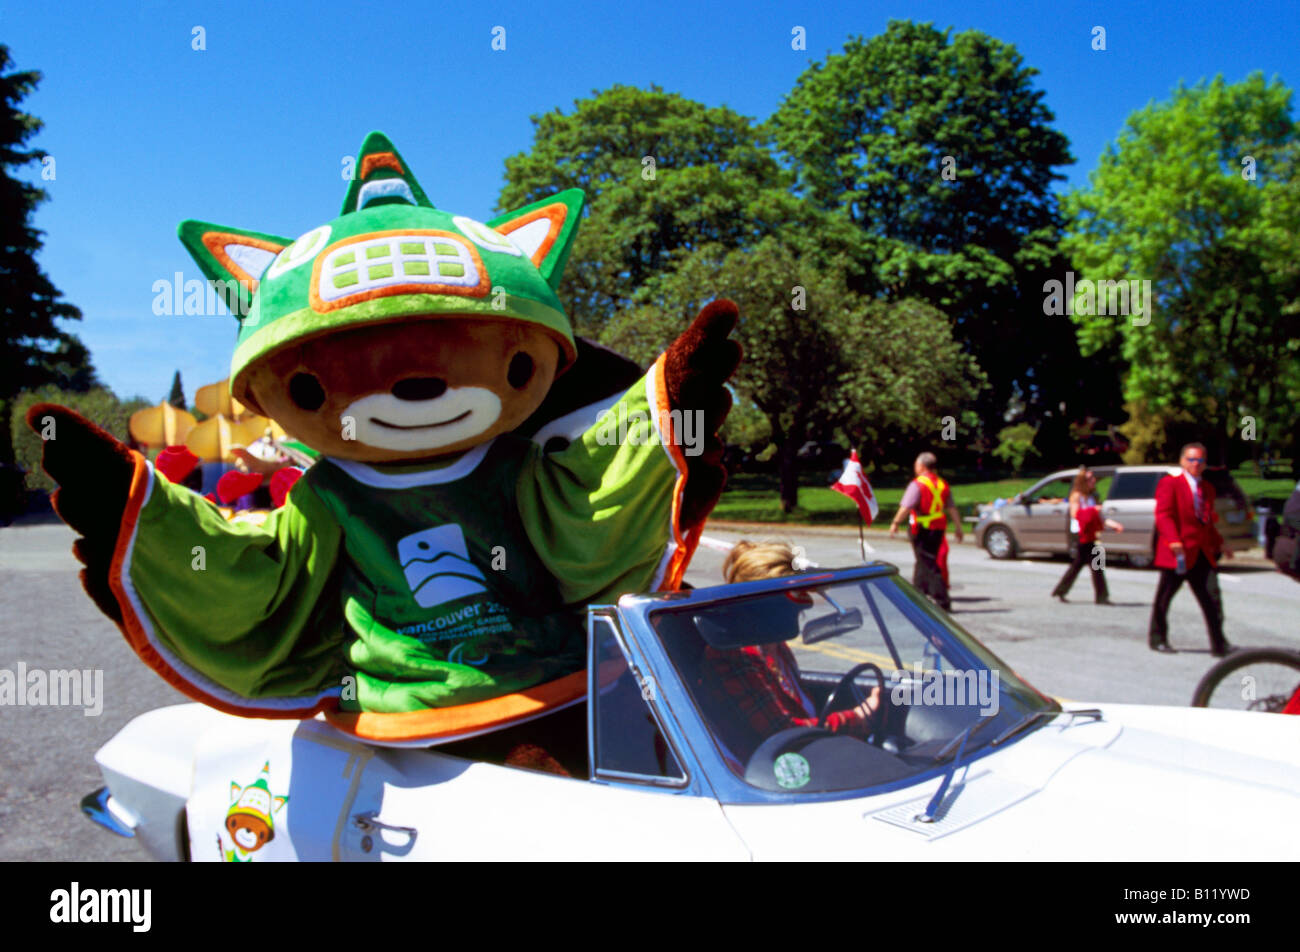 Sumi - Mascot for 2010 Olympic and Paralympic Winter Games - in Hyack Parade, New Westminster, BC, British Columbia, Canada Stock Photo